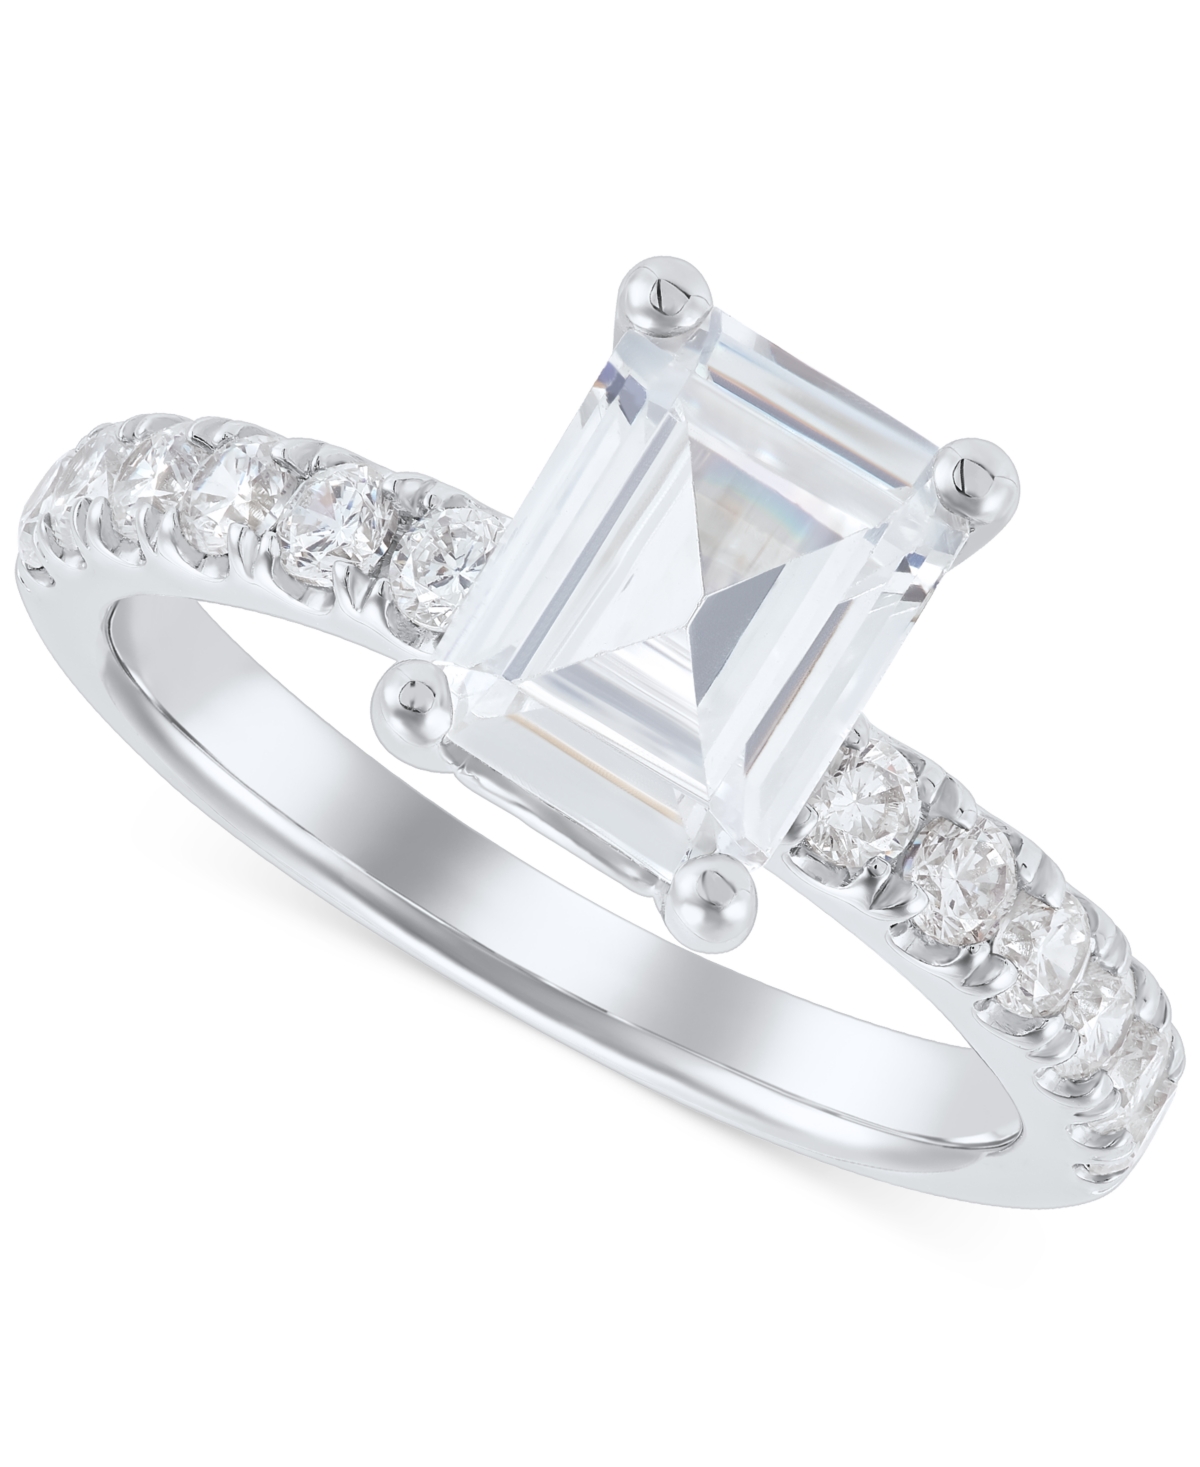 Igi Certified Lab Grown Diamond Emerald-Cut Engagement Ring (3 ct. t.w.) in 14k White Gold - White Gold